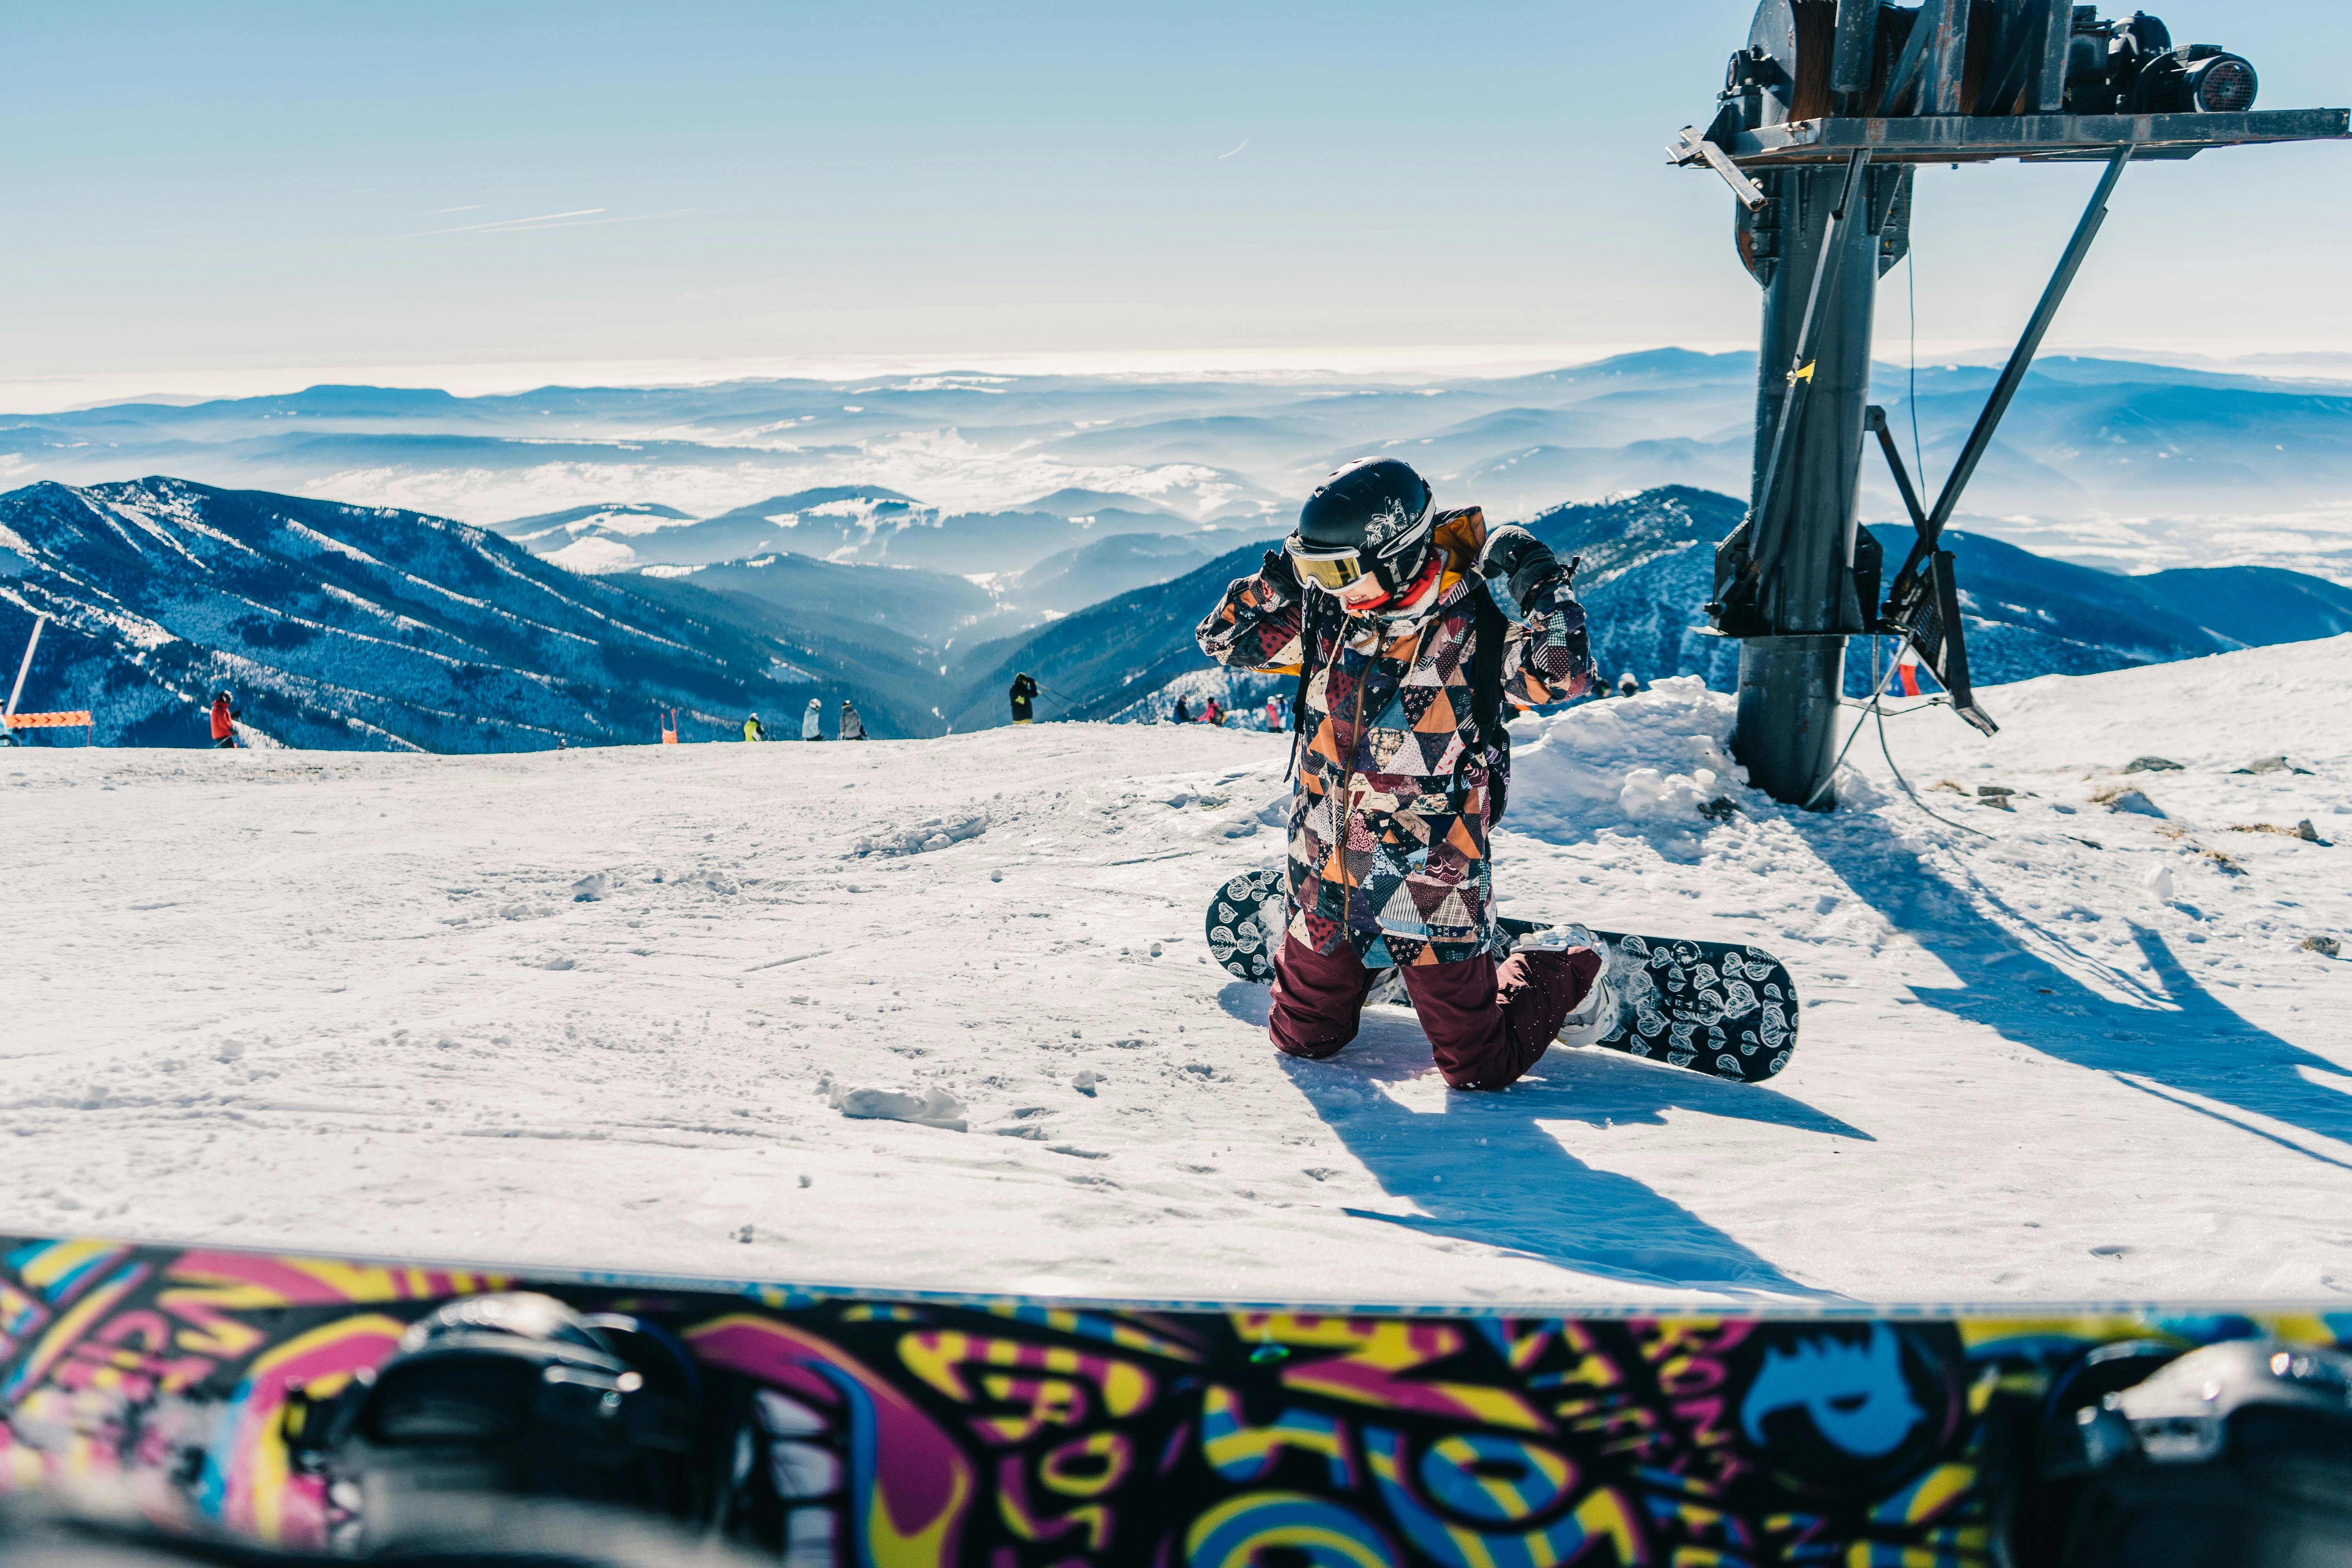 A snowboarder in a brightly colored geometric pattern jacket kneels to adjust their hood